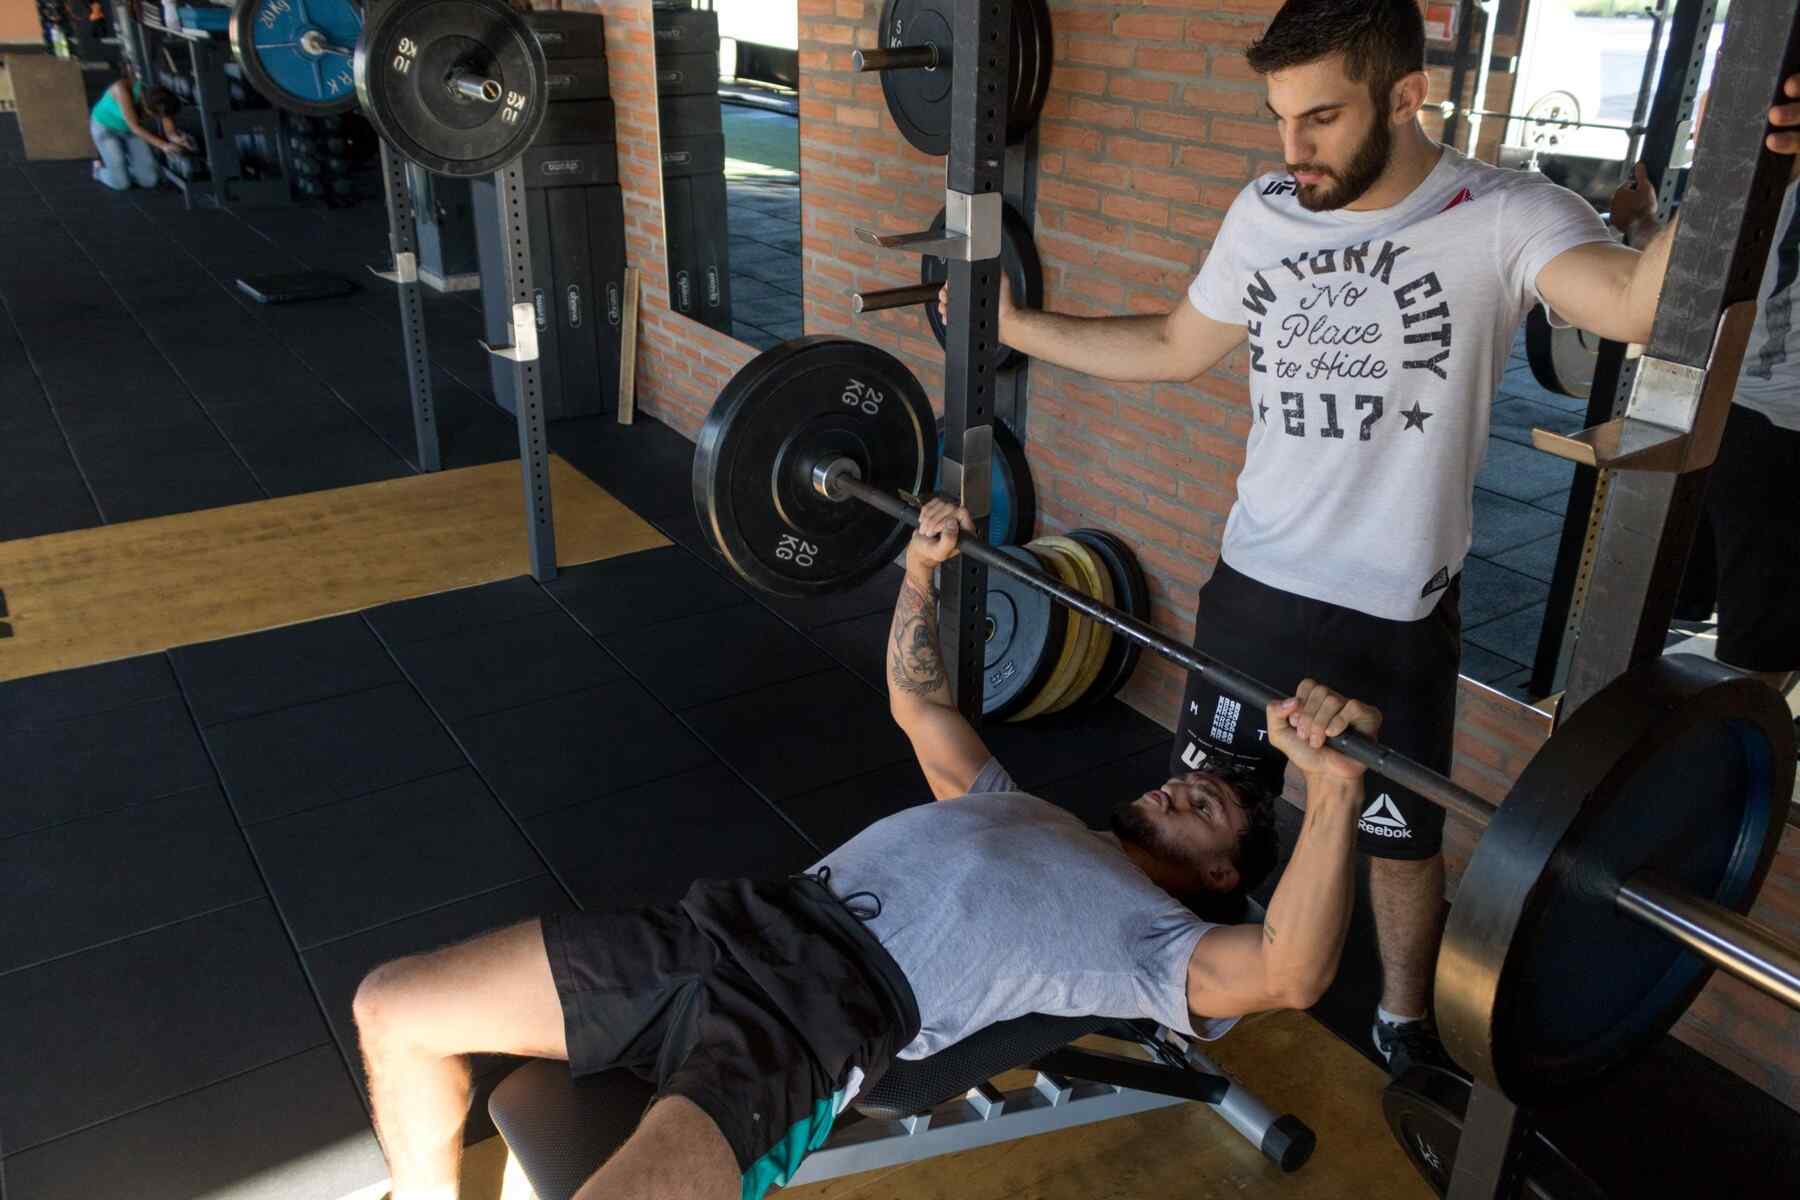 A man assisting another man while lifting a barbell